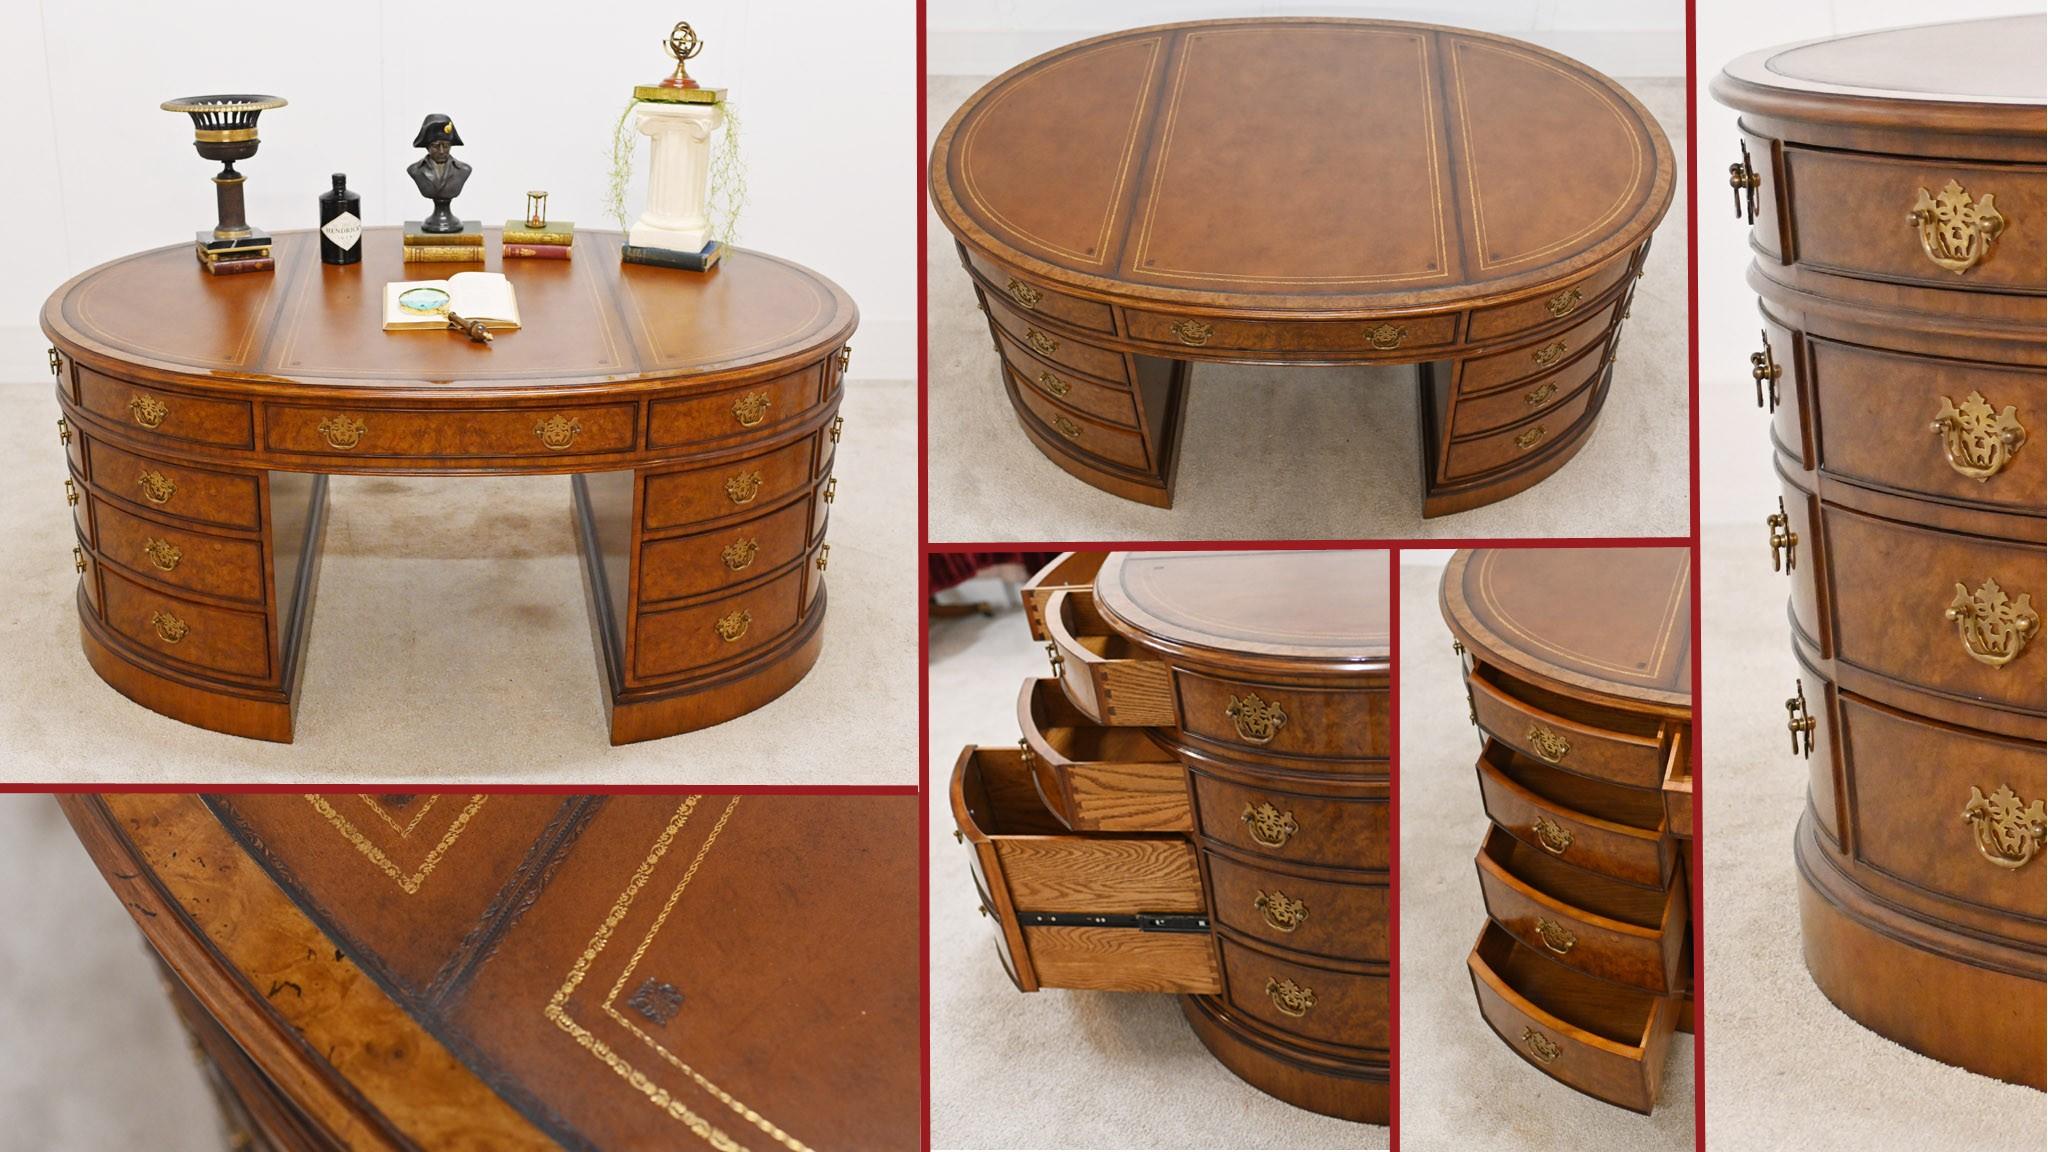 Gorgeous burr walnut oval partners desk in the Victorian manner
This is a true partners desk with drawers on both sides so plenty of storage
Great side so perfect for a home office set up
The oval form makes it very comfortable to sit at
One side